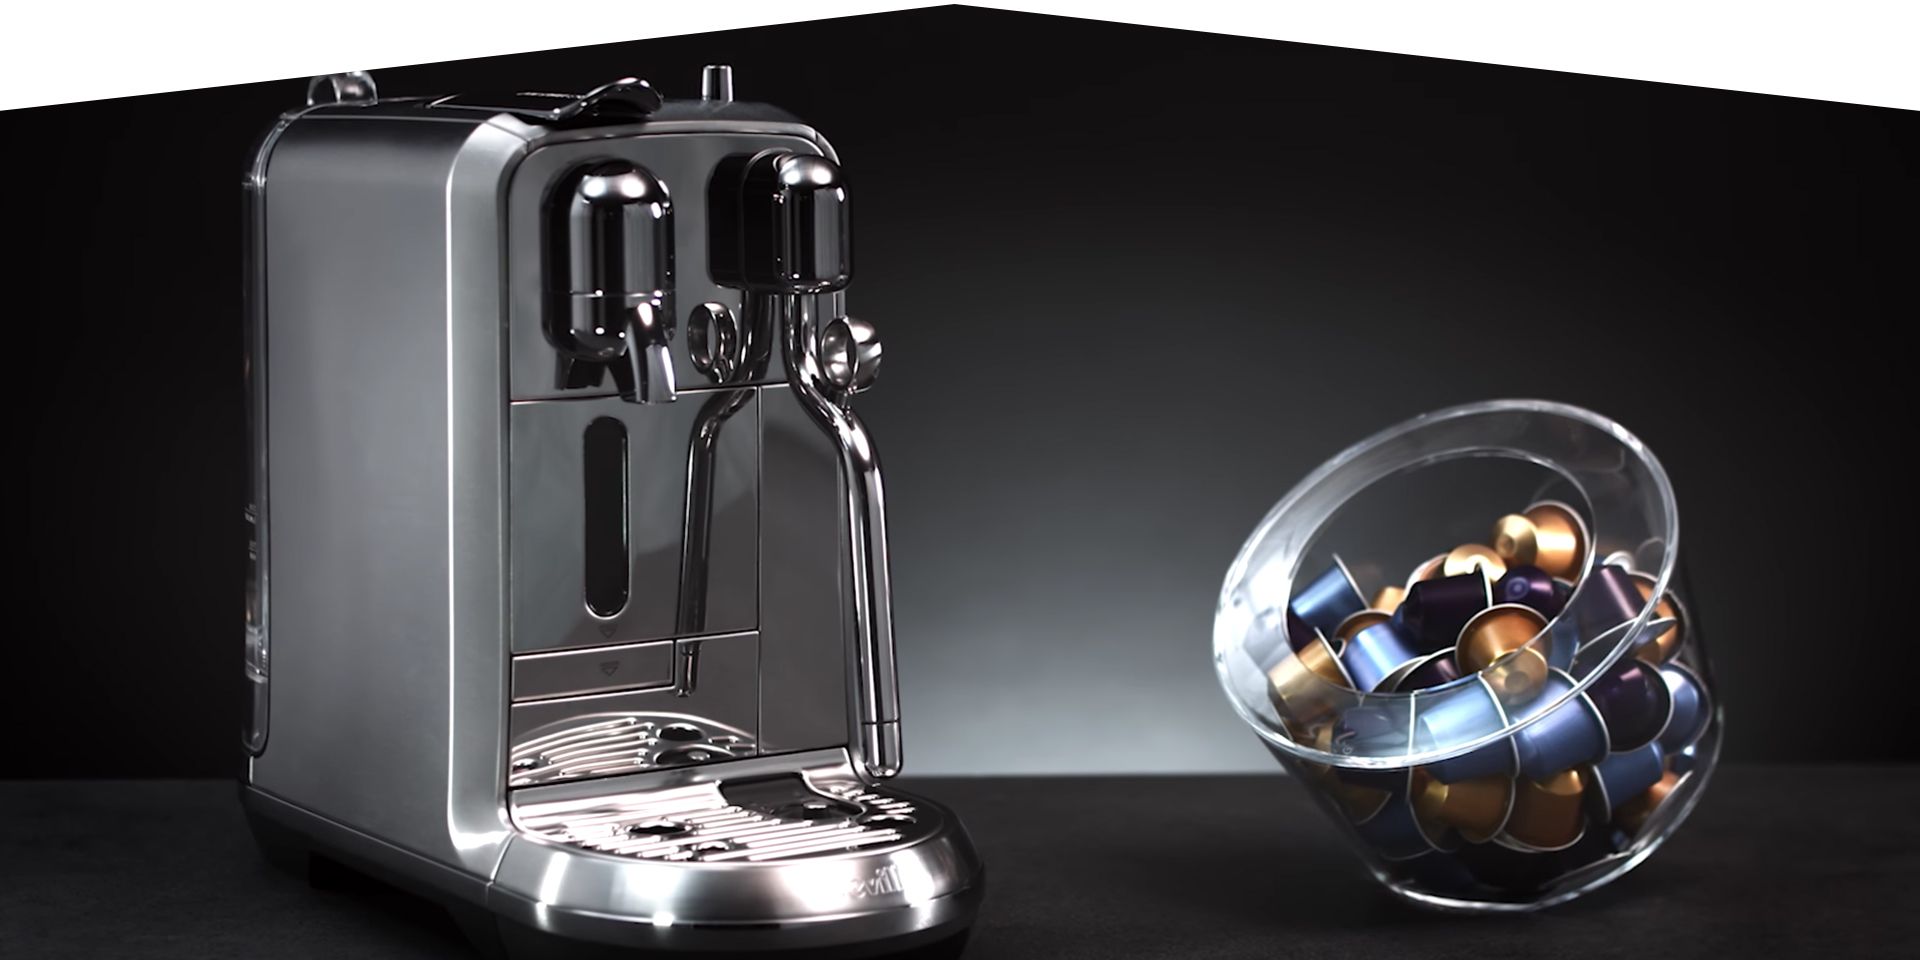 The Best Espresso Machine You Can Buy Is Breville's Nespresso